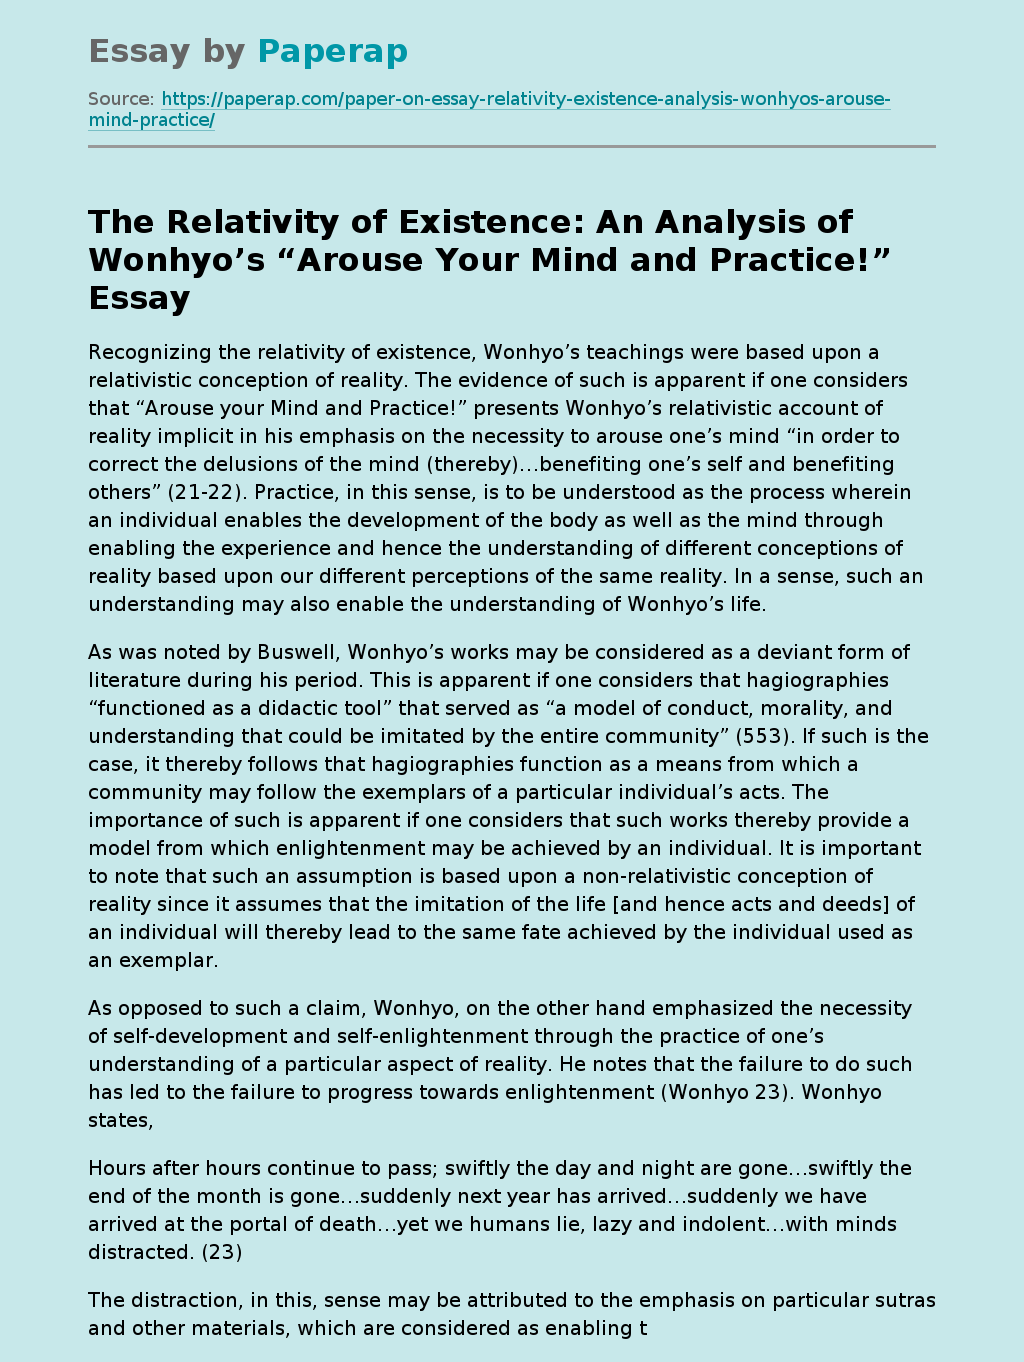 The Relativity of Existence: An Analysis of Wonhyo’s “Arouse Your Mind and Practice!”